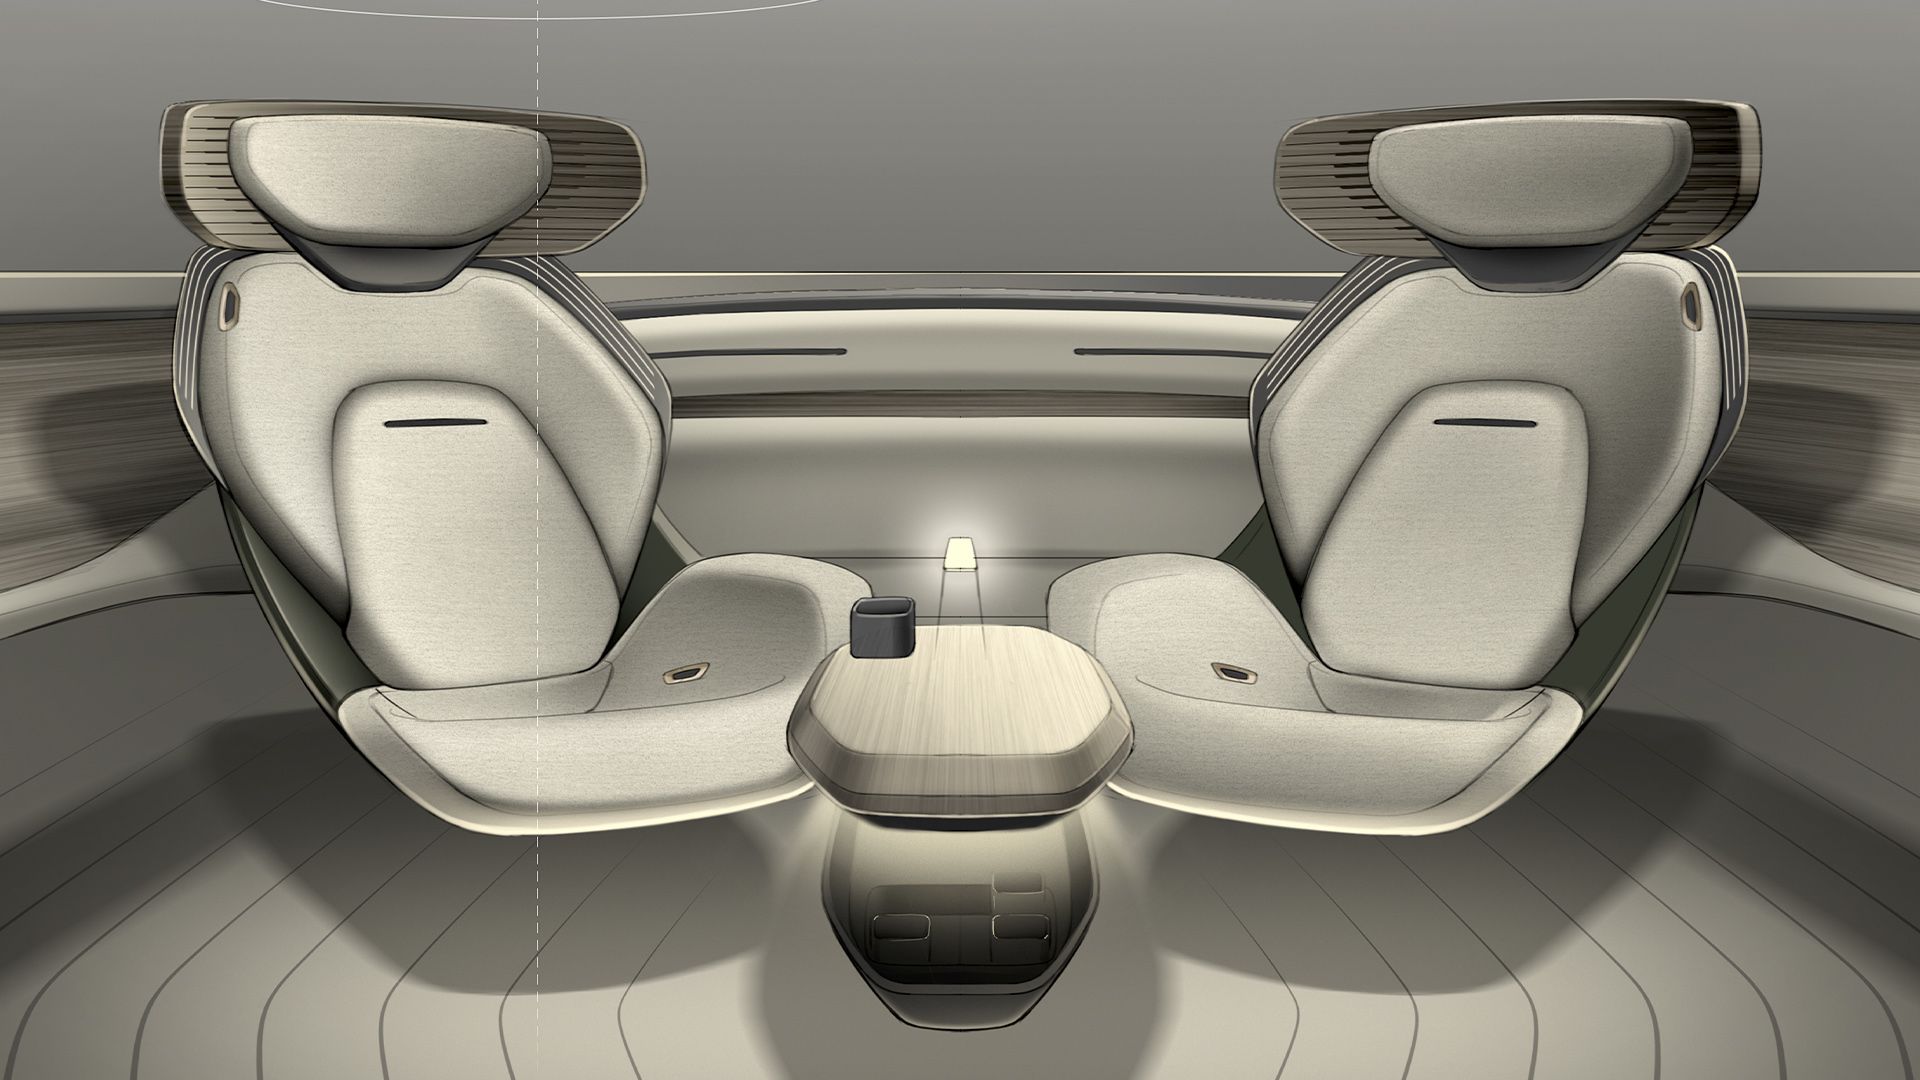 A sketch shows two car seats in the Audi urbansphere concept that are turned to face each other, with a table in between.